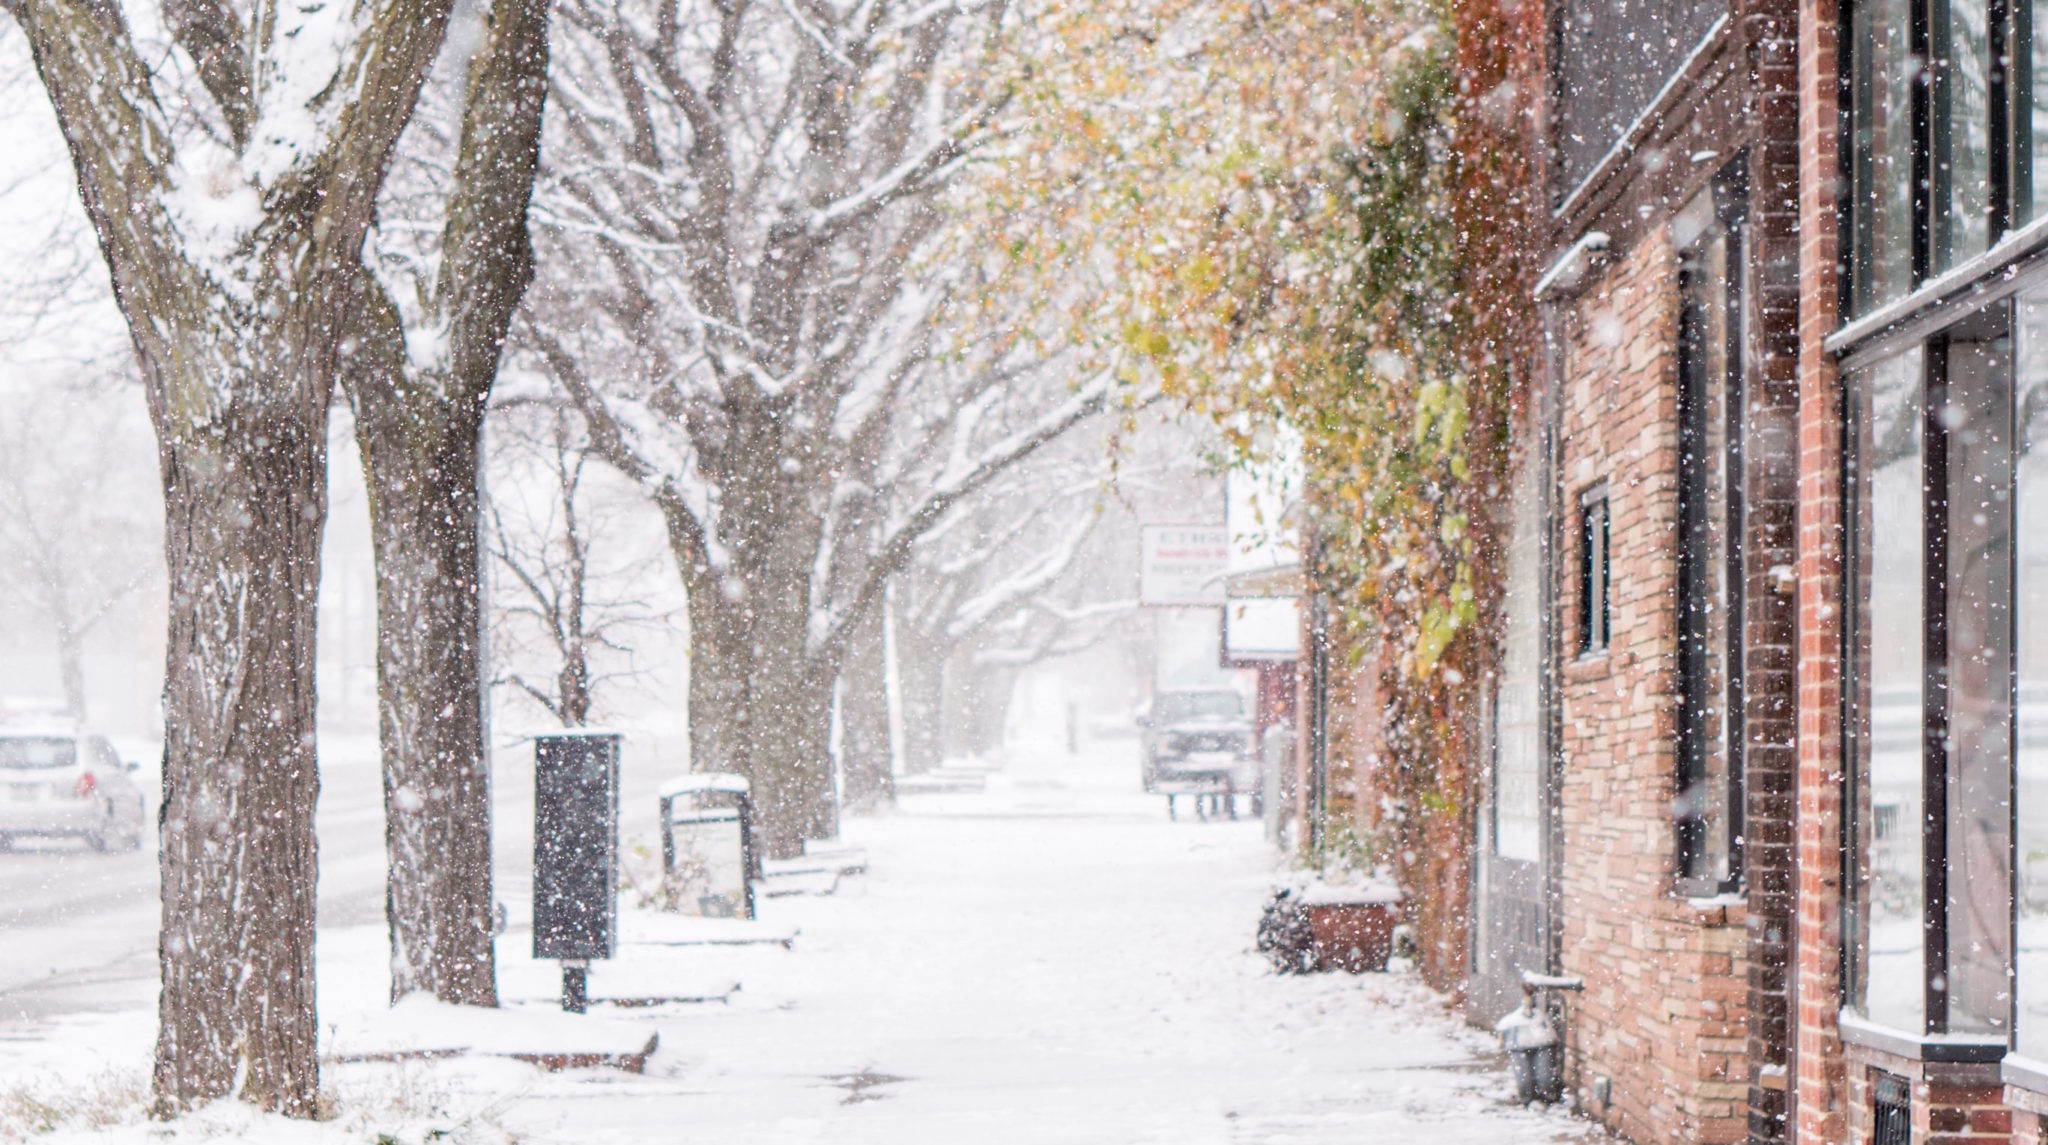 How to Protect Your Business from Break-Ins During the Winter of COVID-19